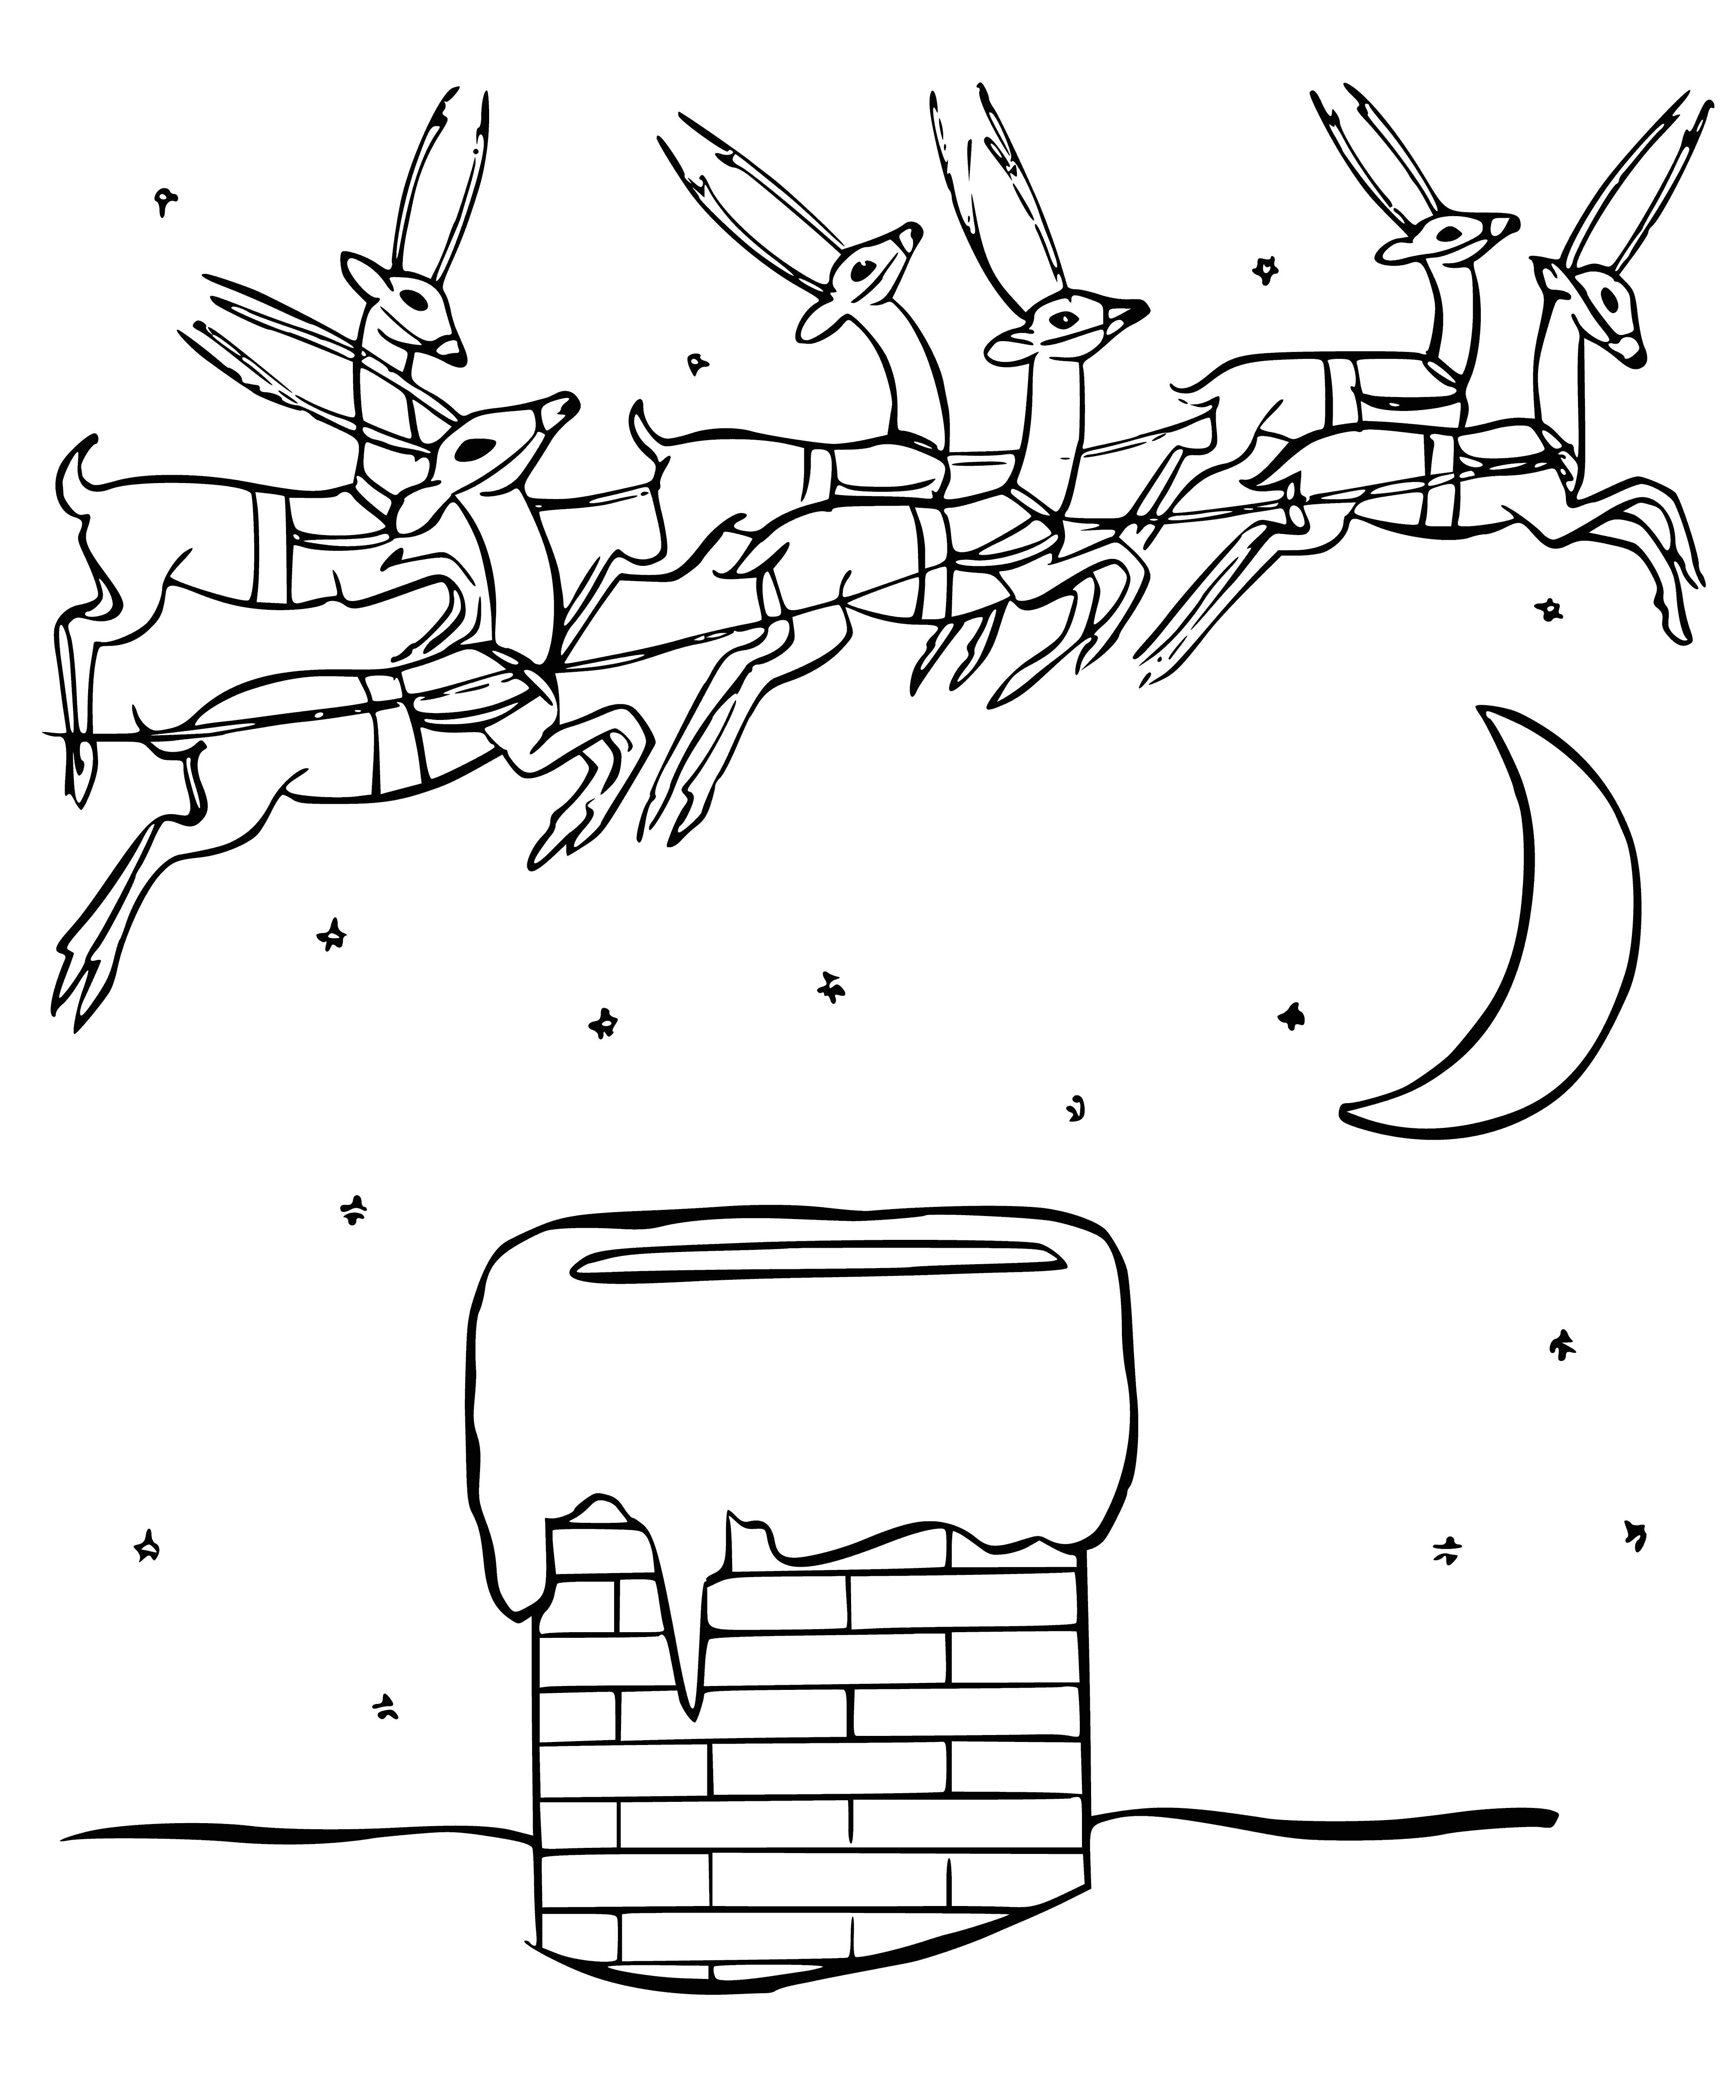 Santa riding in a long, red-cloth covered carriage drawn by 8 white reindeer, waving and smiling with two sacks of presents.